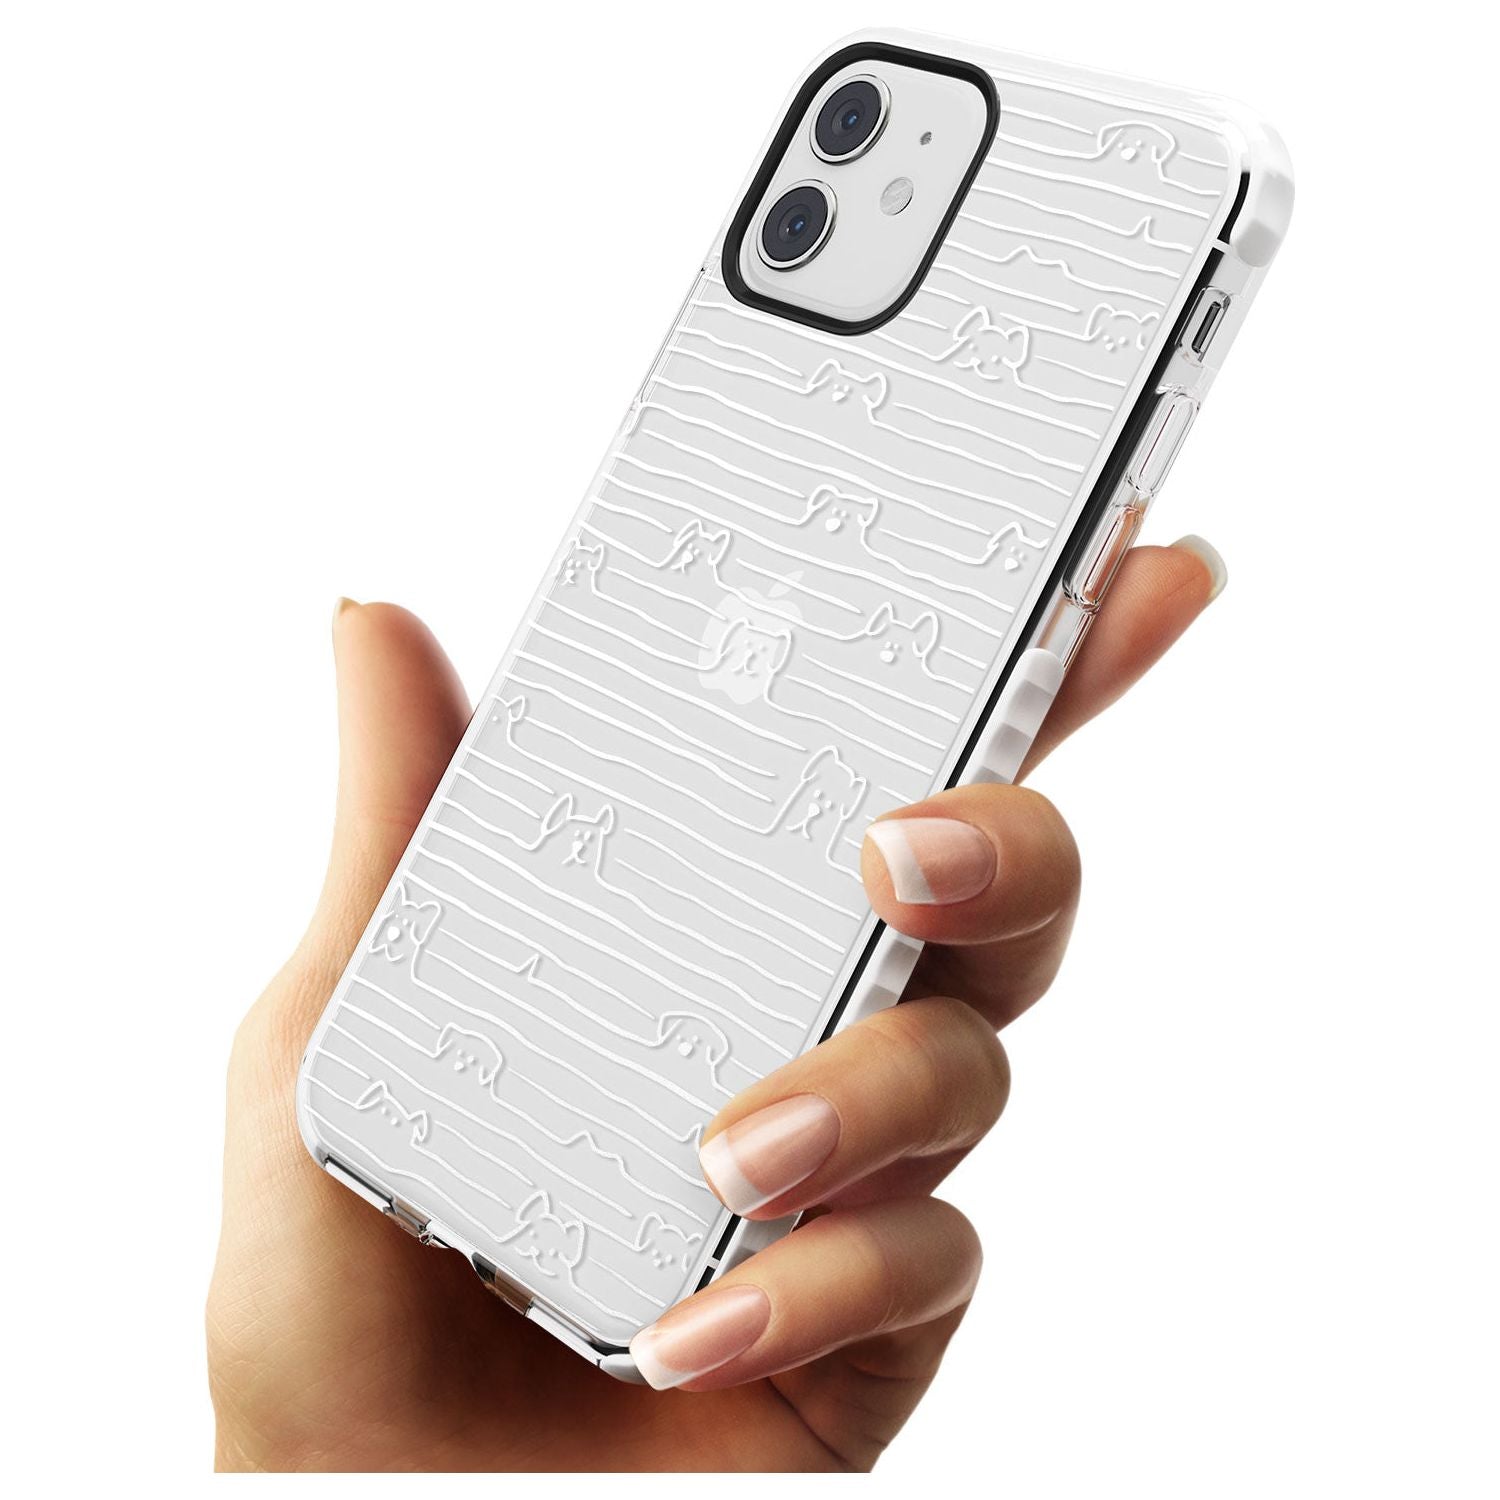 Dog Line Art - White Impact Phone Case for iPhone 11